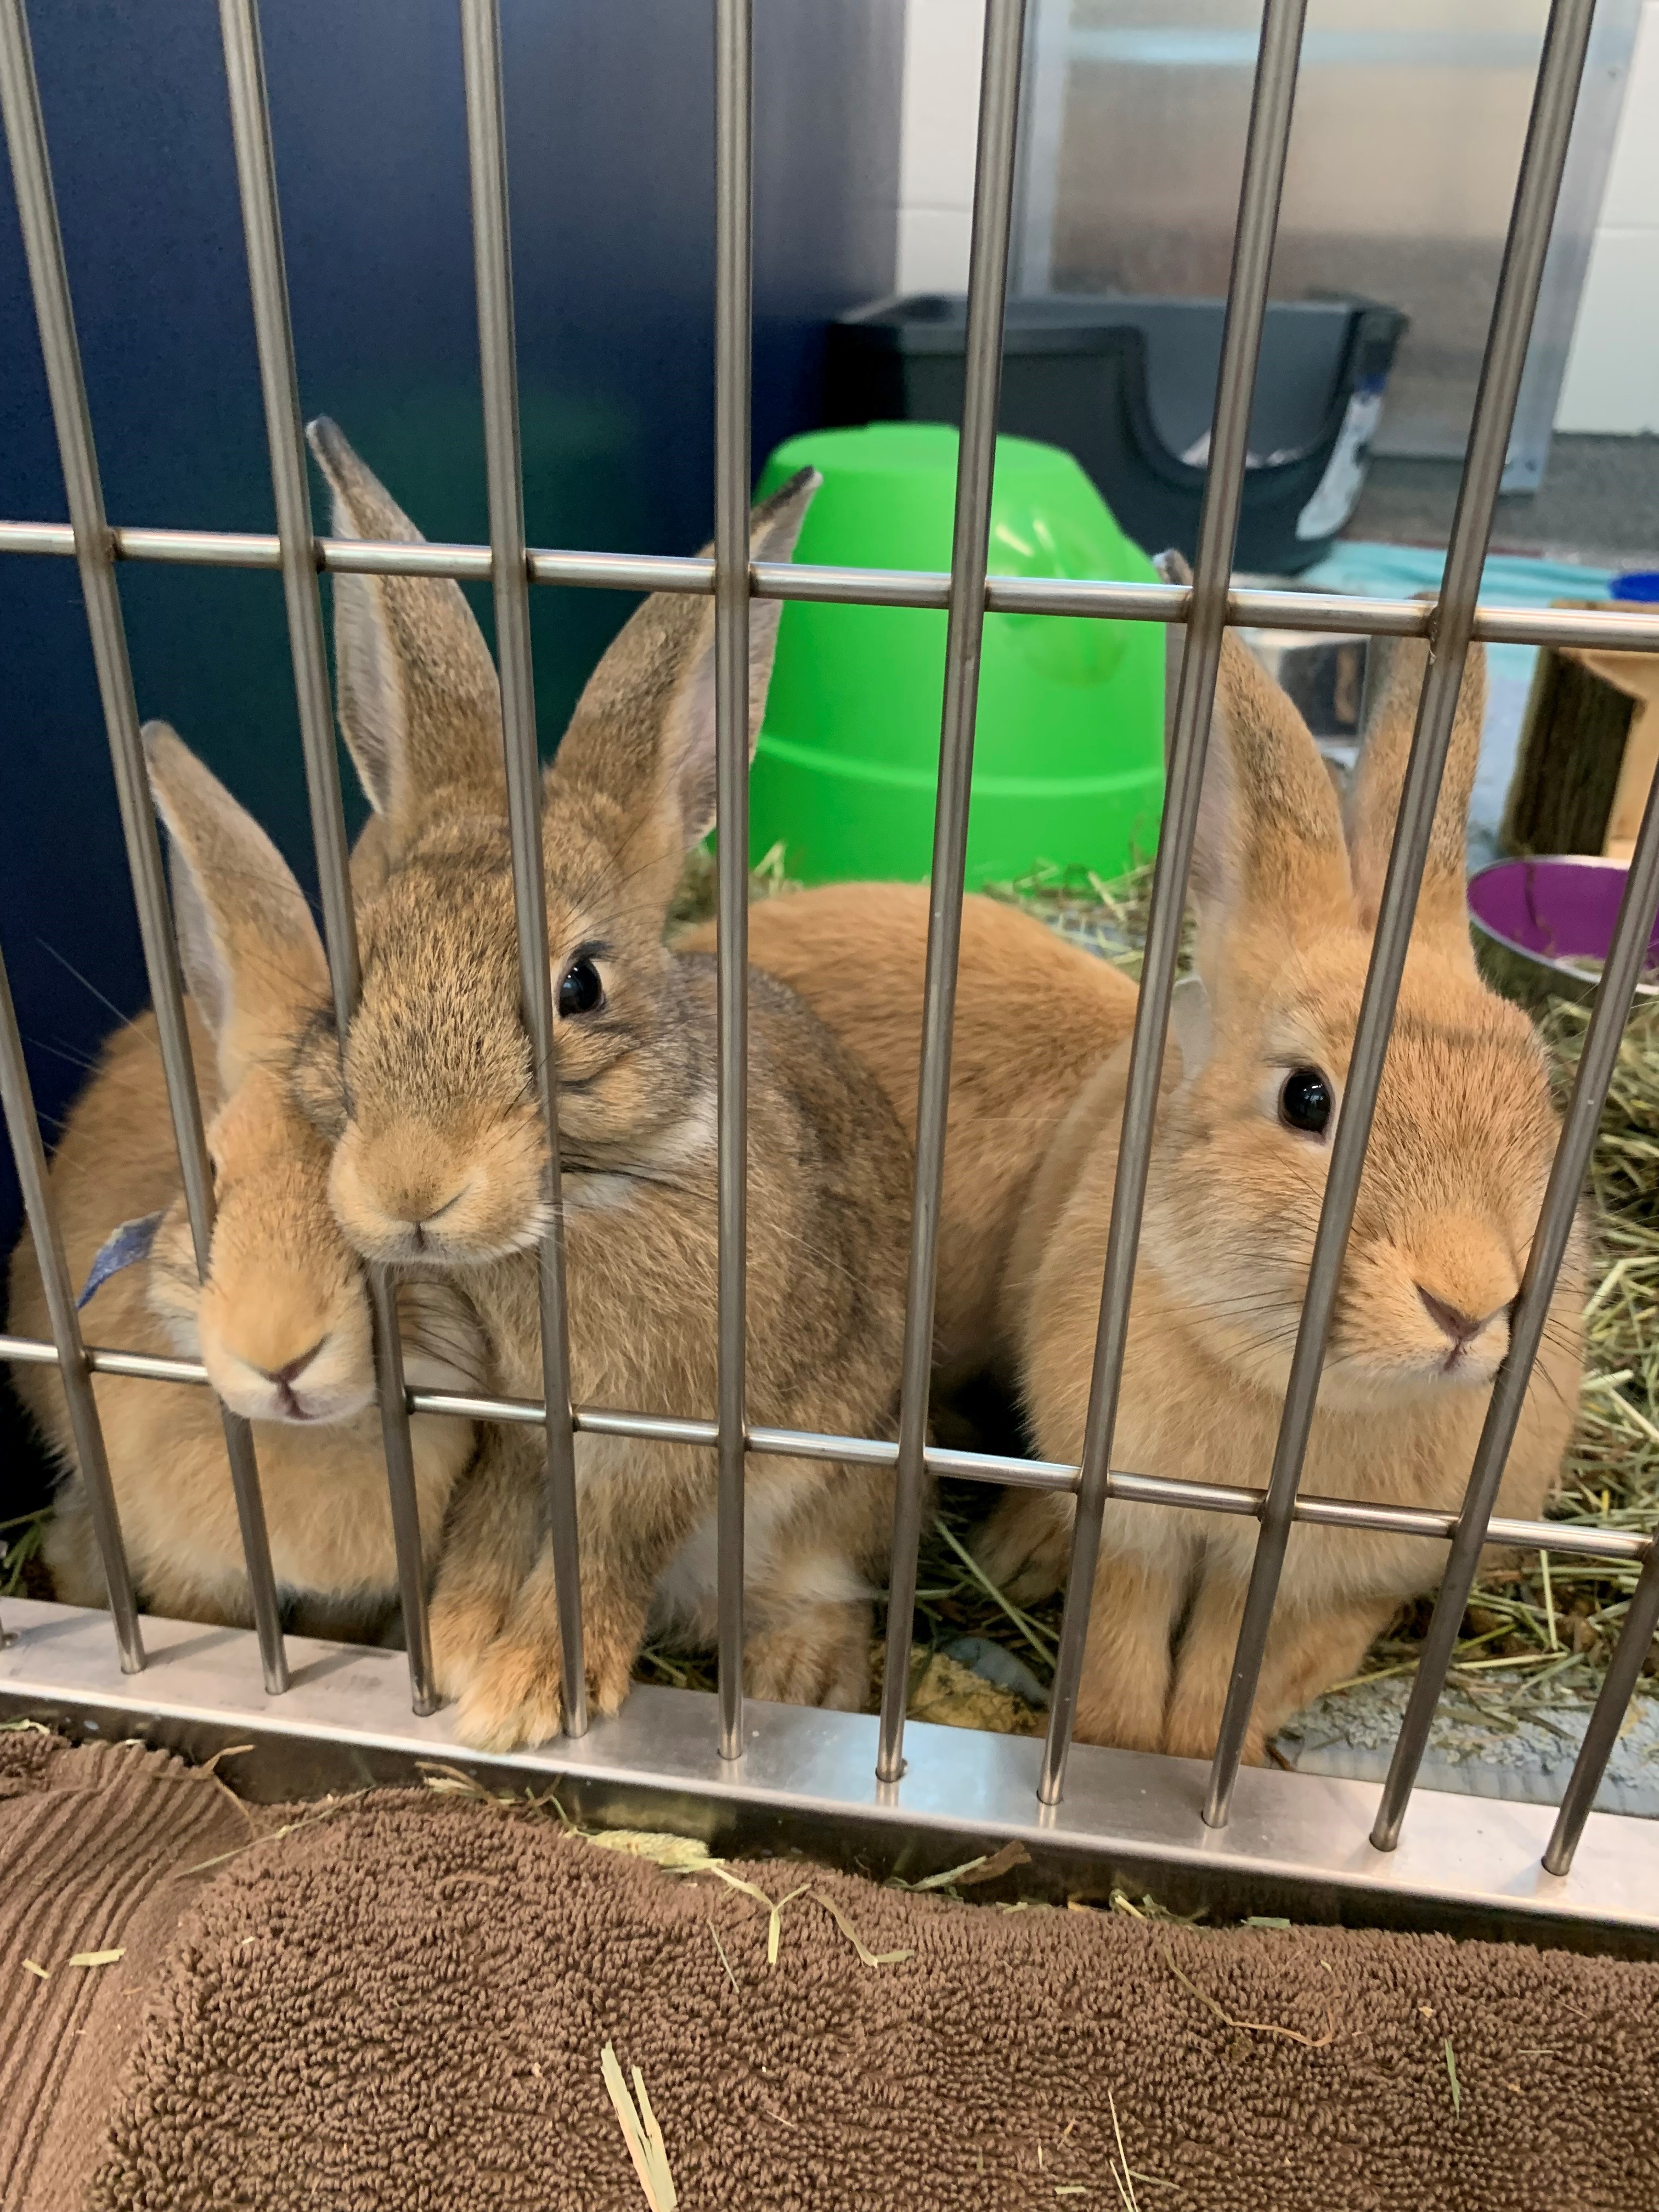 guelph humane society warns of bunny population